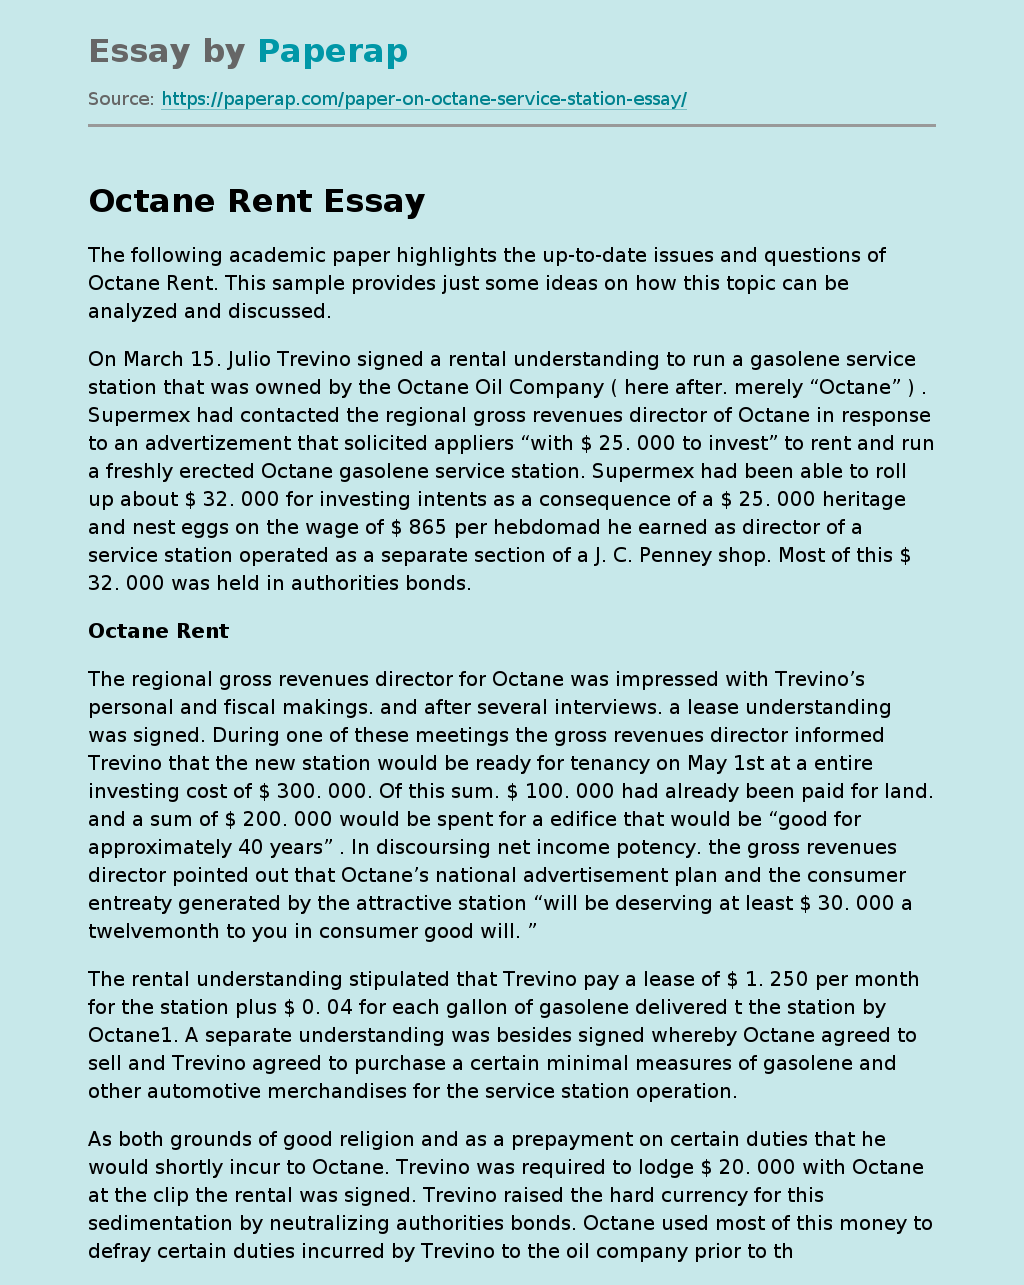 Up-to-Date Issues and Questions of Octane Rent